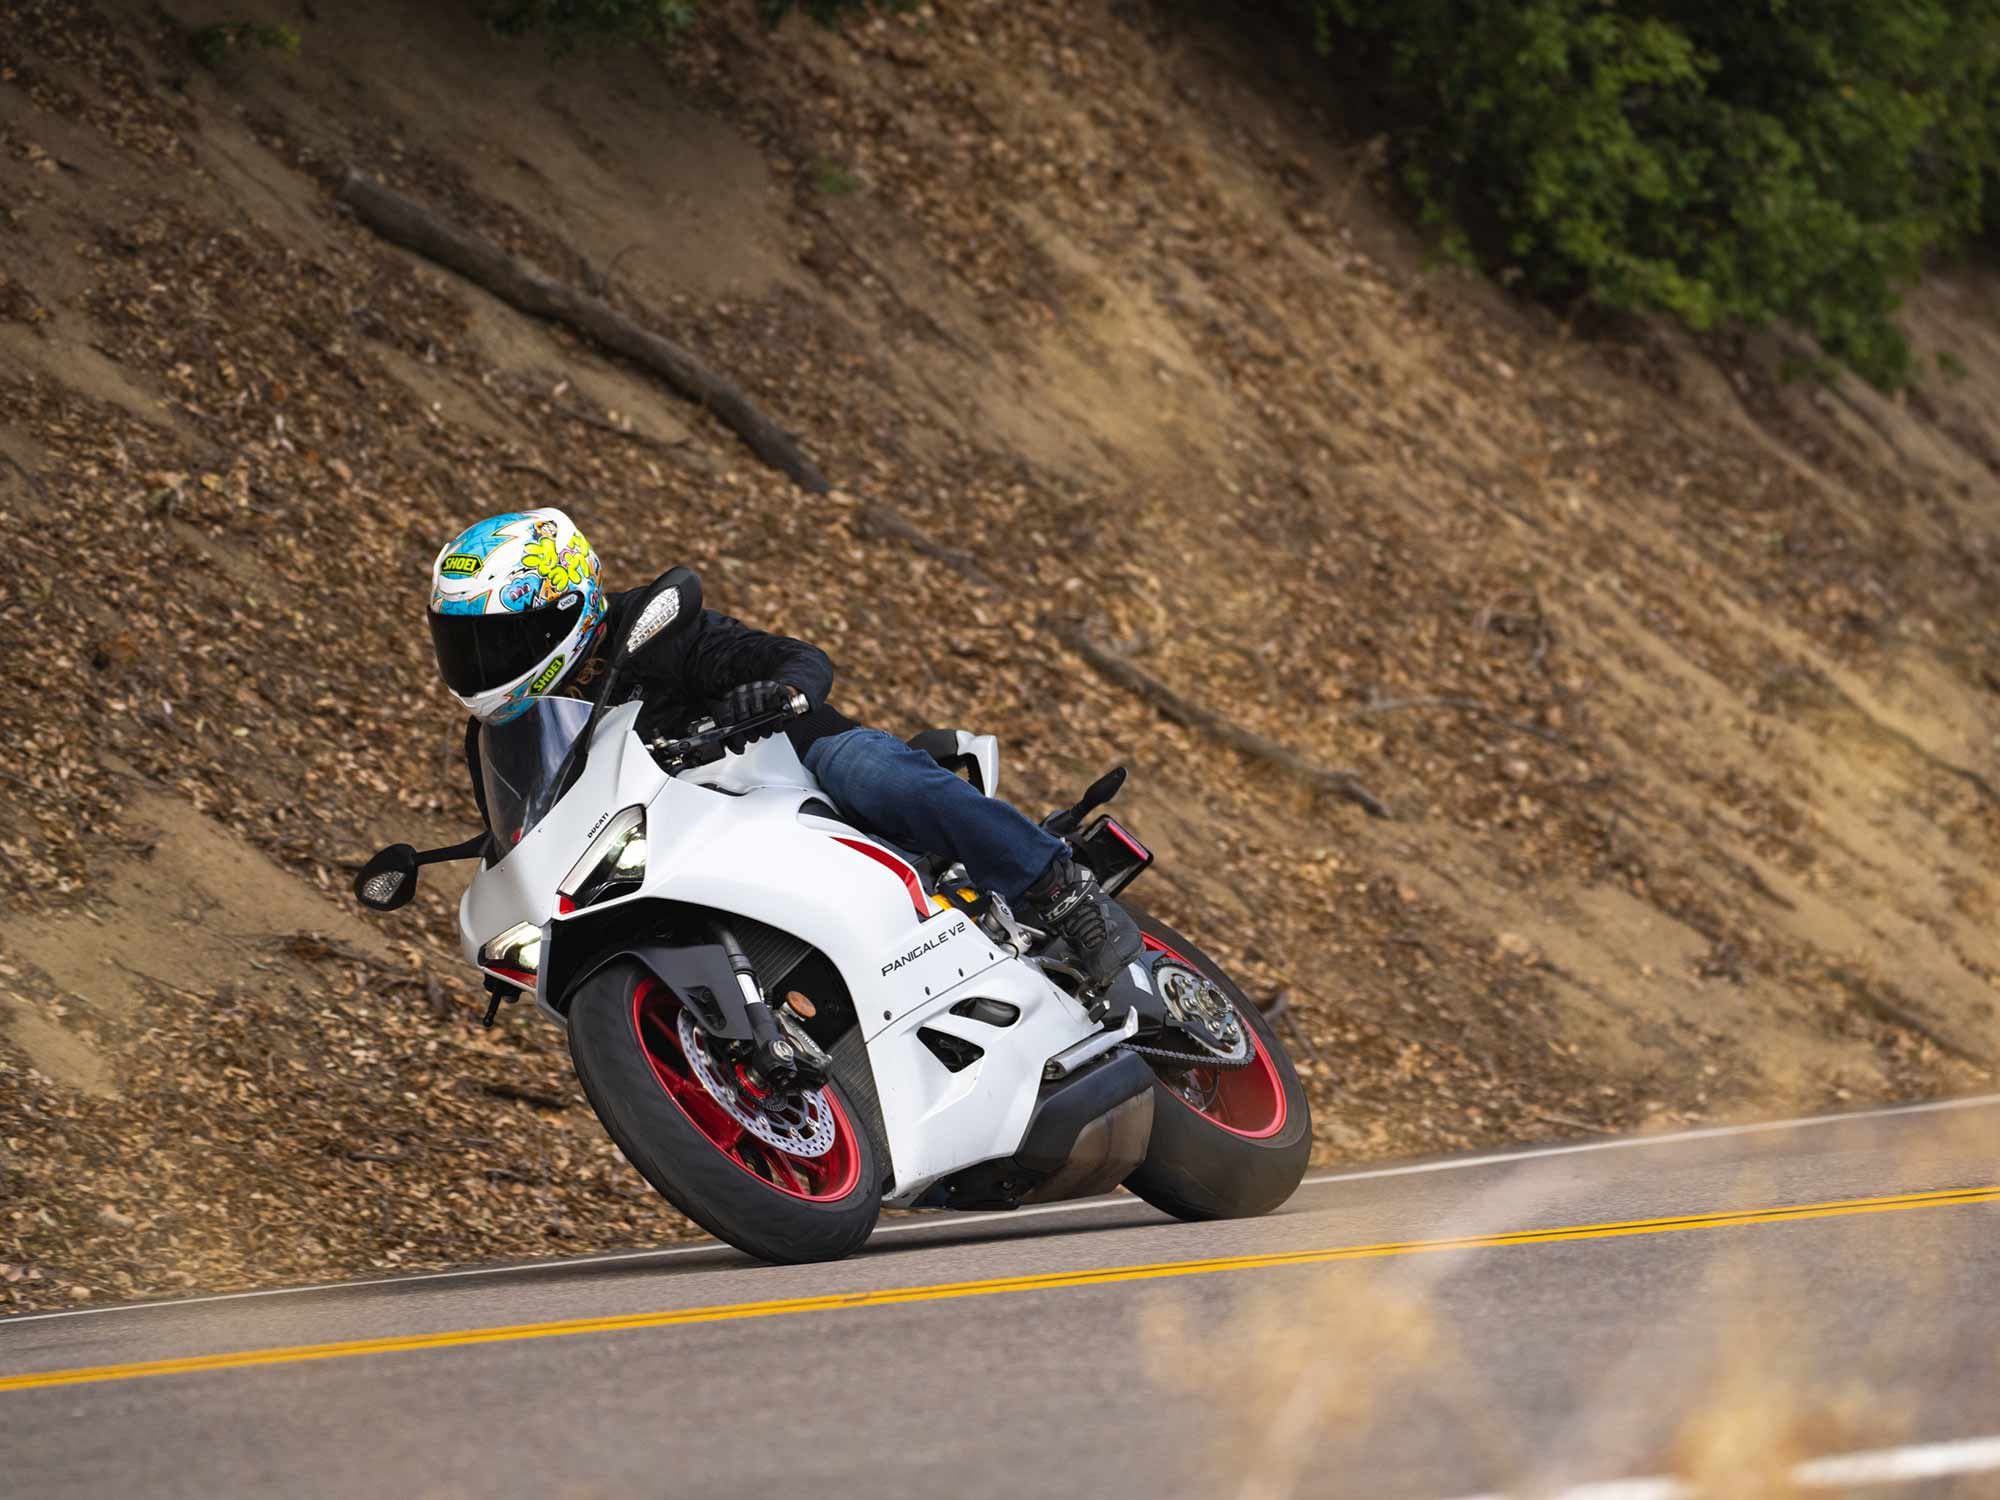 The Panigale V2 certainly can’t be called cheap with its $17,395 MSRP.